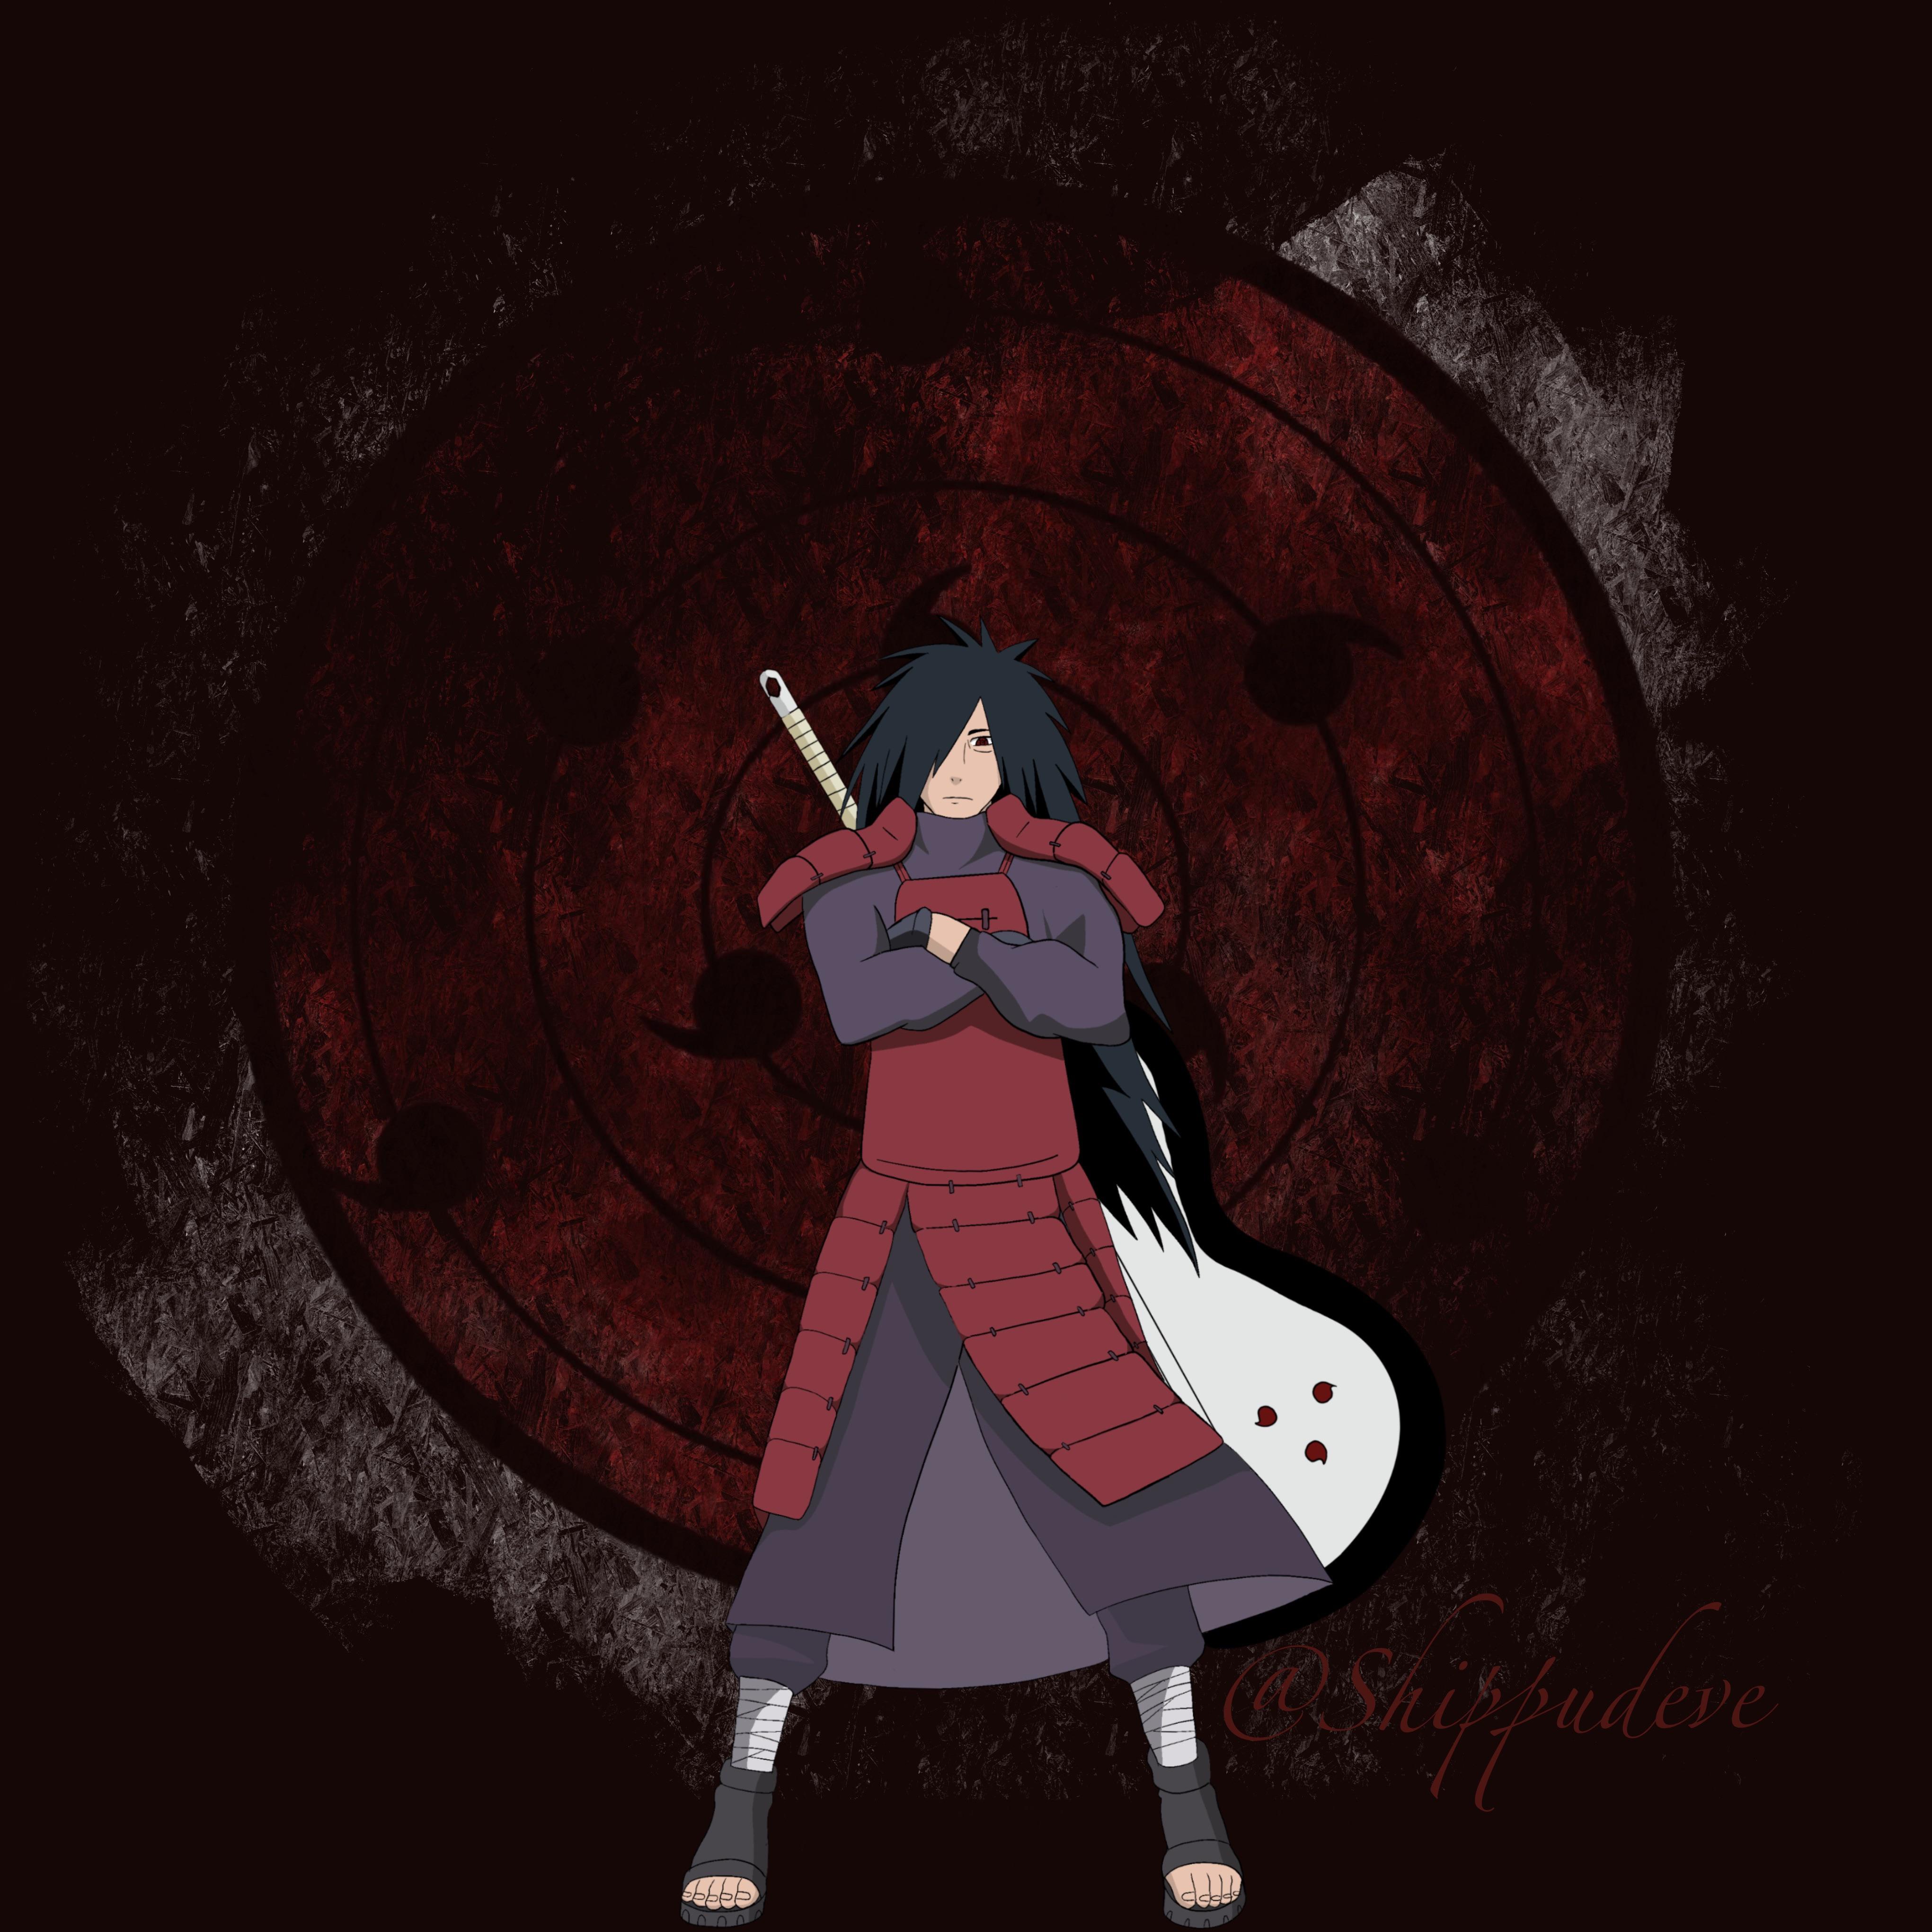 Wake up to reality! Nothing ever goes as planned in this accursed world“ uchiha madara